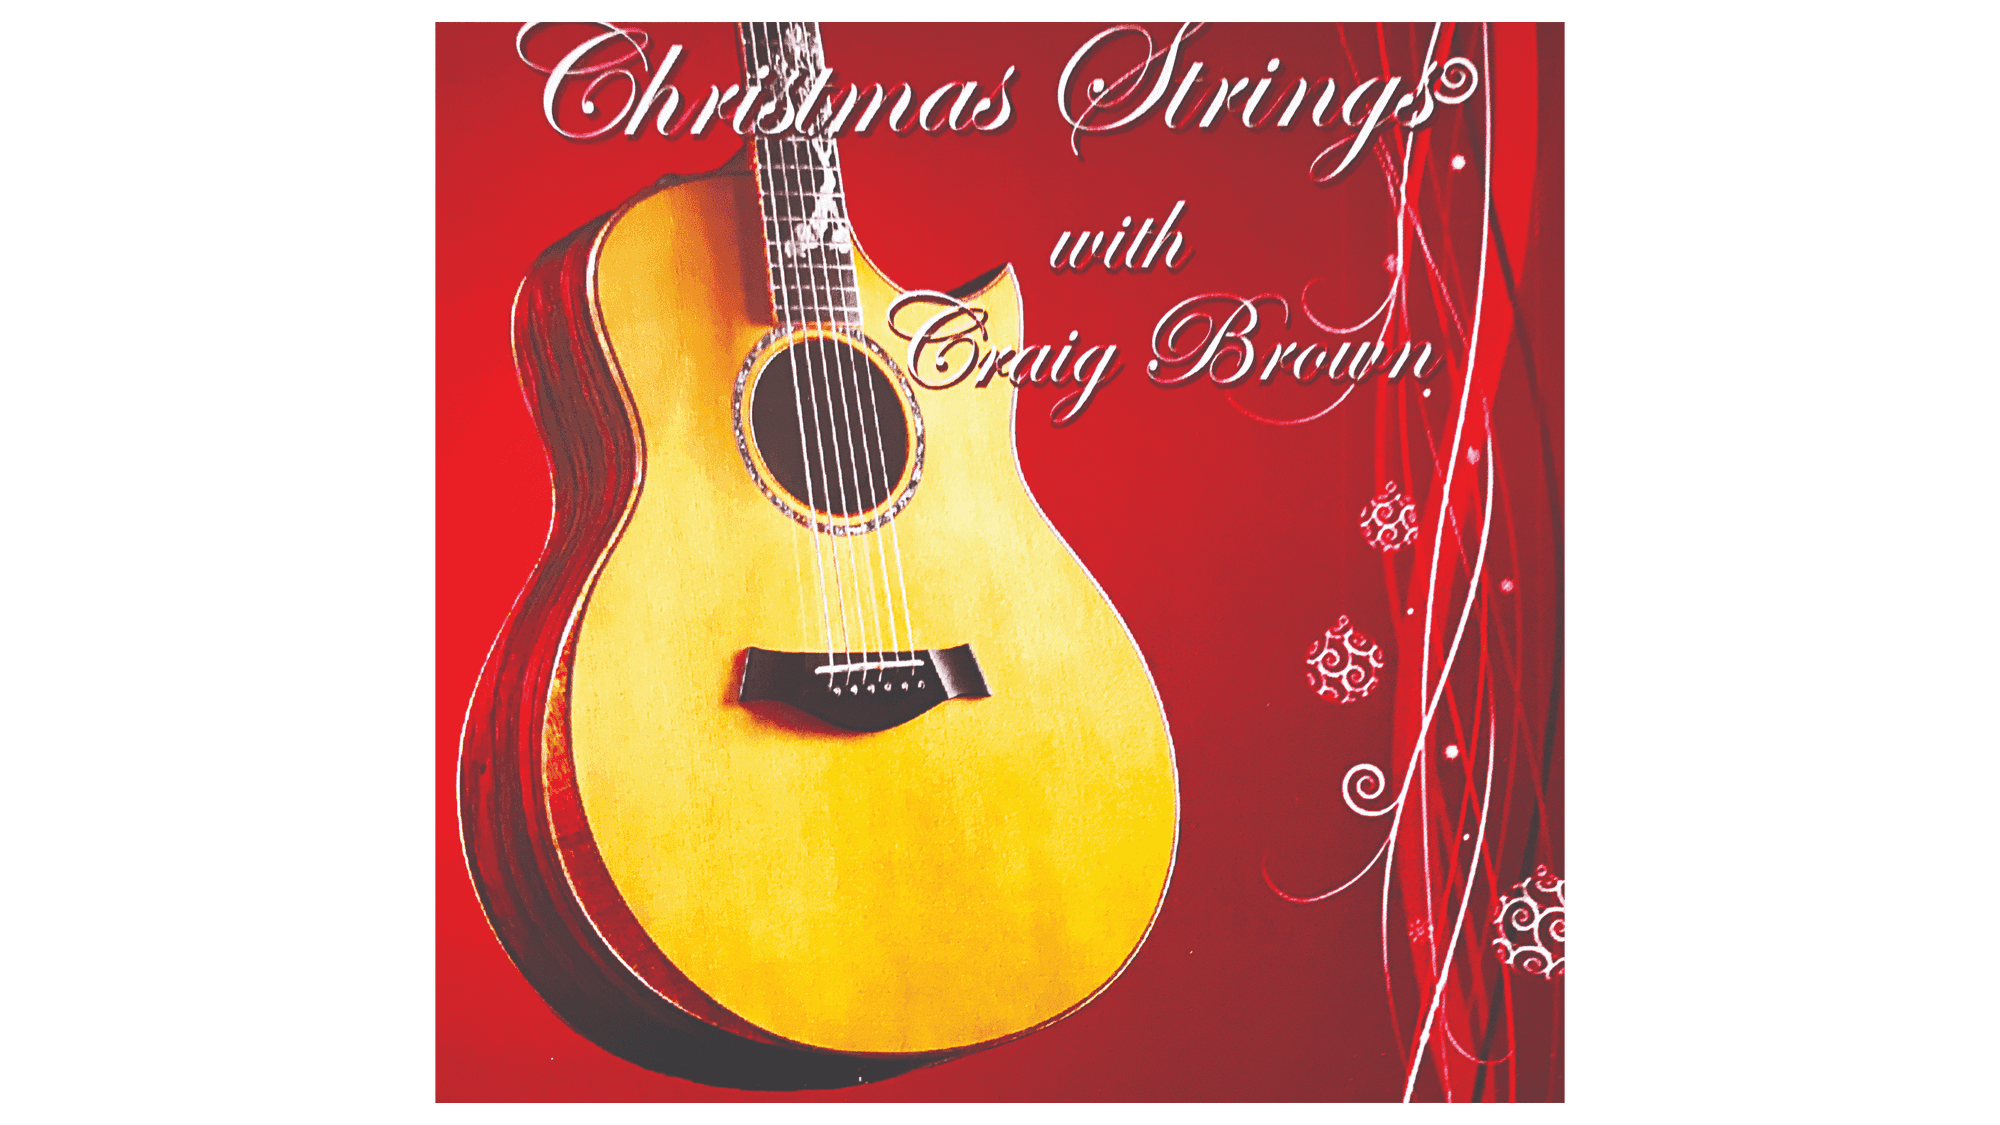 CD: Christmas Strings with Craig Brown